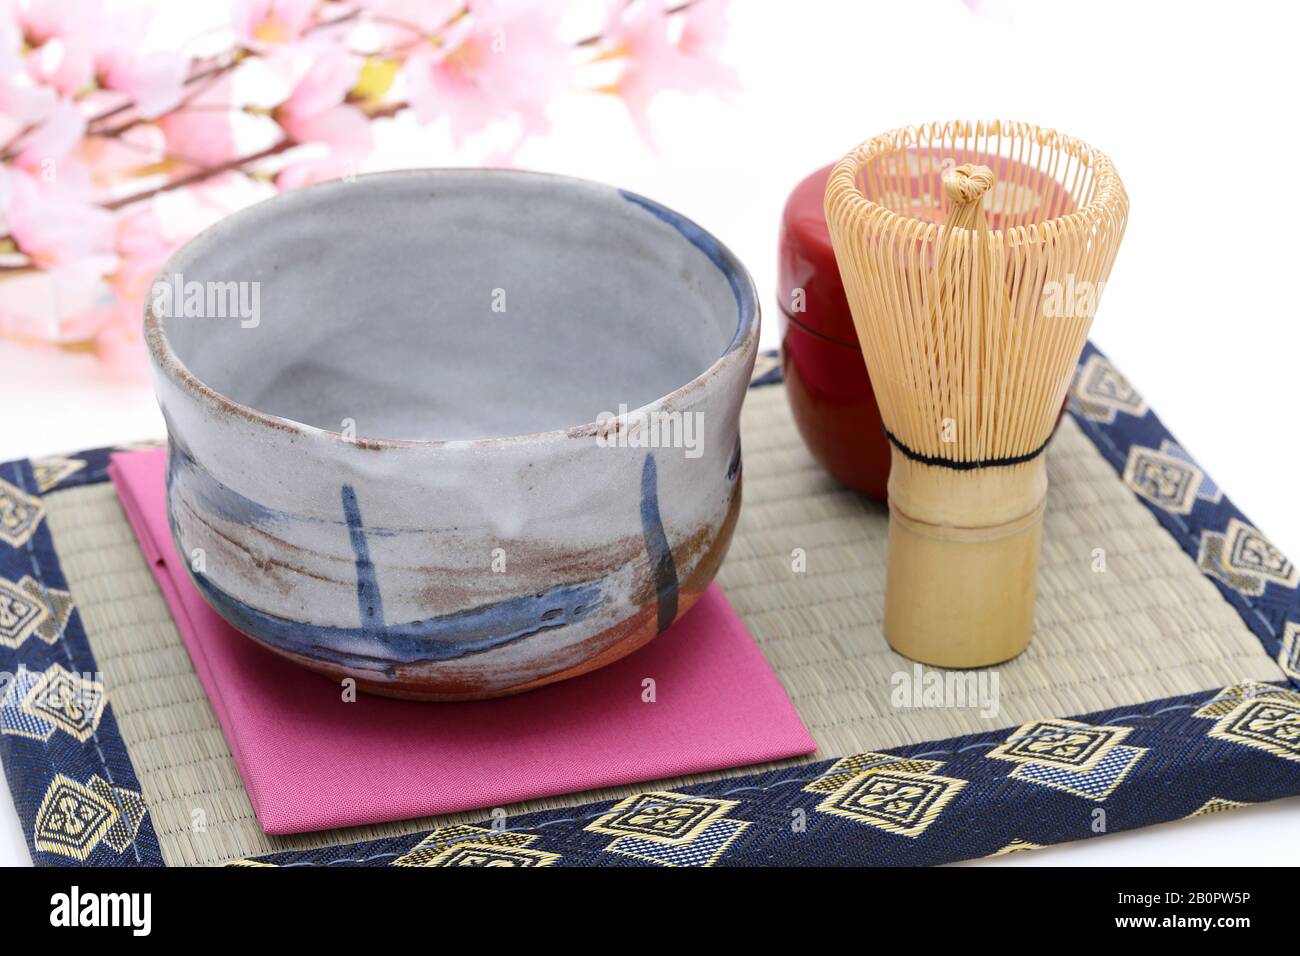 Tea bowl with tea whisk used in Japanese matcha green tea ceremony on white hackgrond Stock Photo